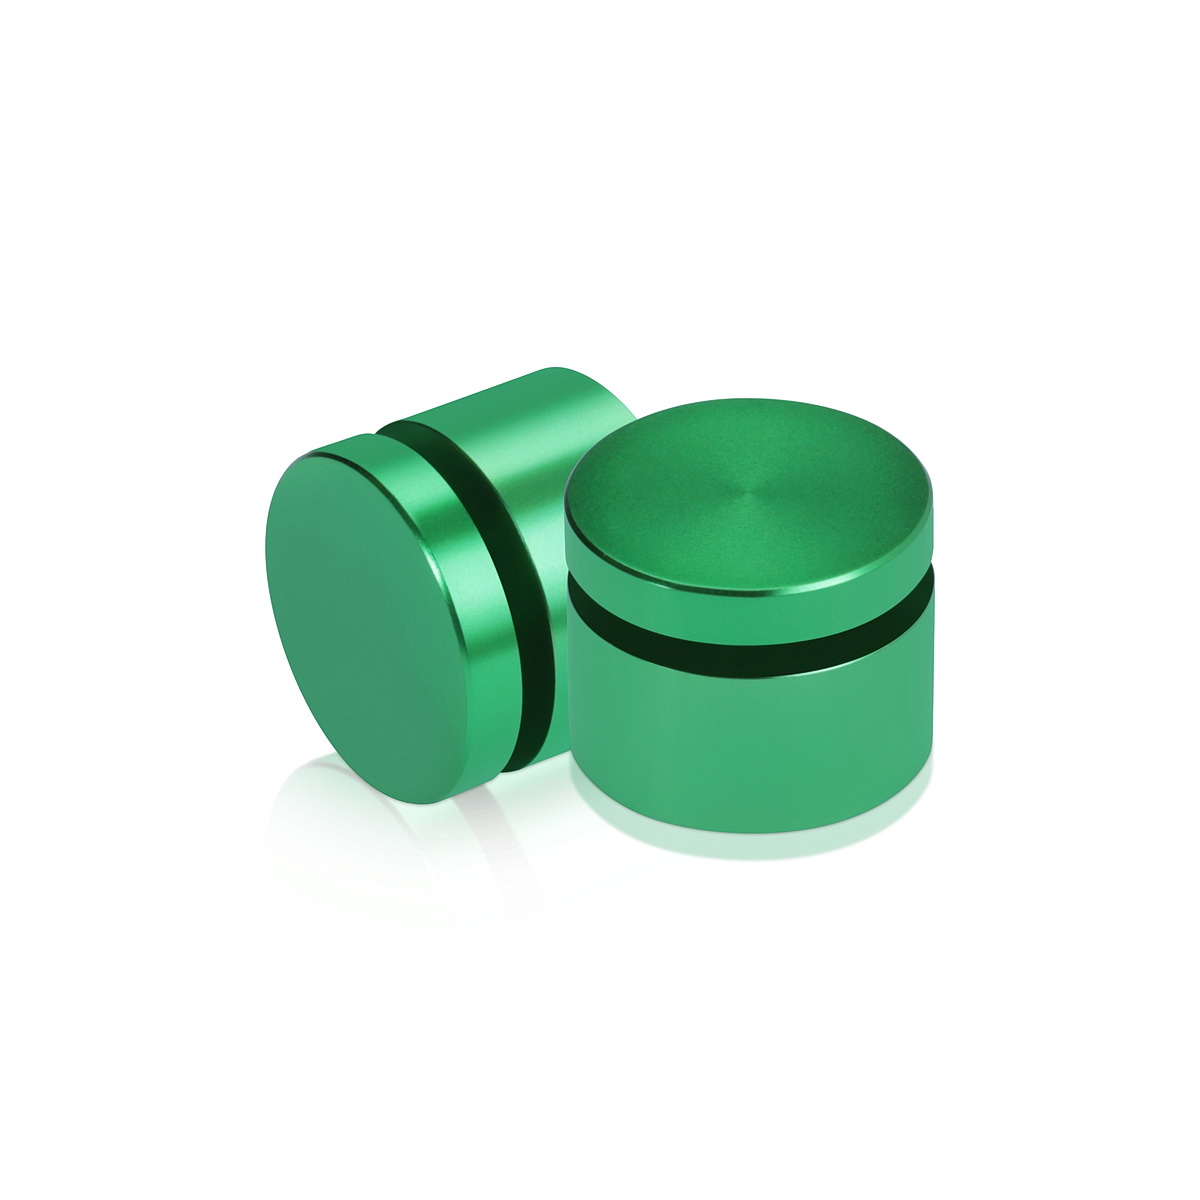 1'' Diameter X 1/2'' Barrel Length, Affordable Aluminum Standoffs, Green Anodized Finish Easy Fasten Standoff (For Inside / Outside use) [Required Material Hole Size: 7/16'']